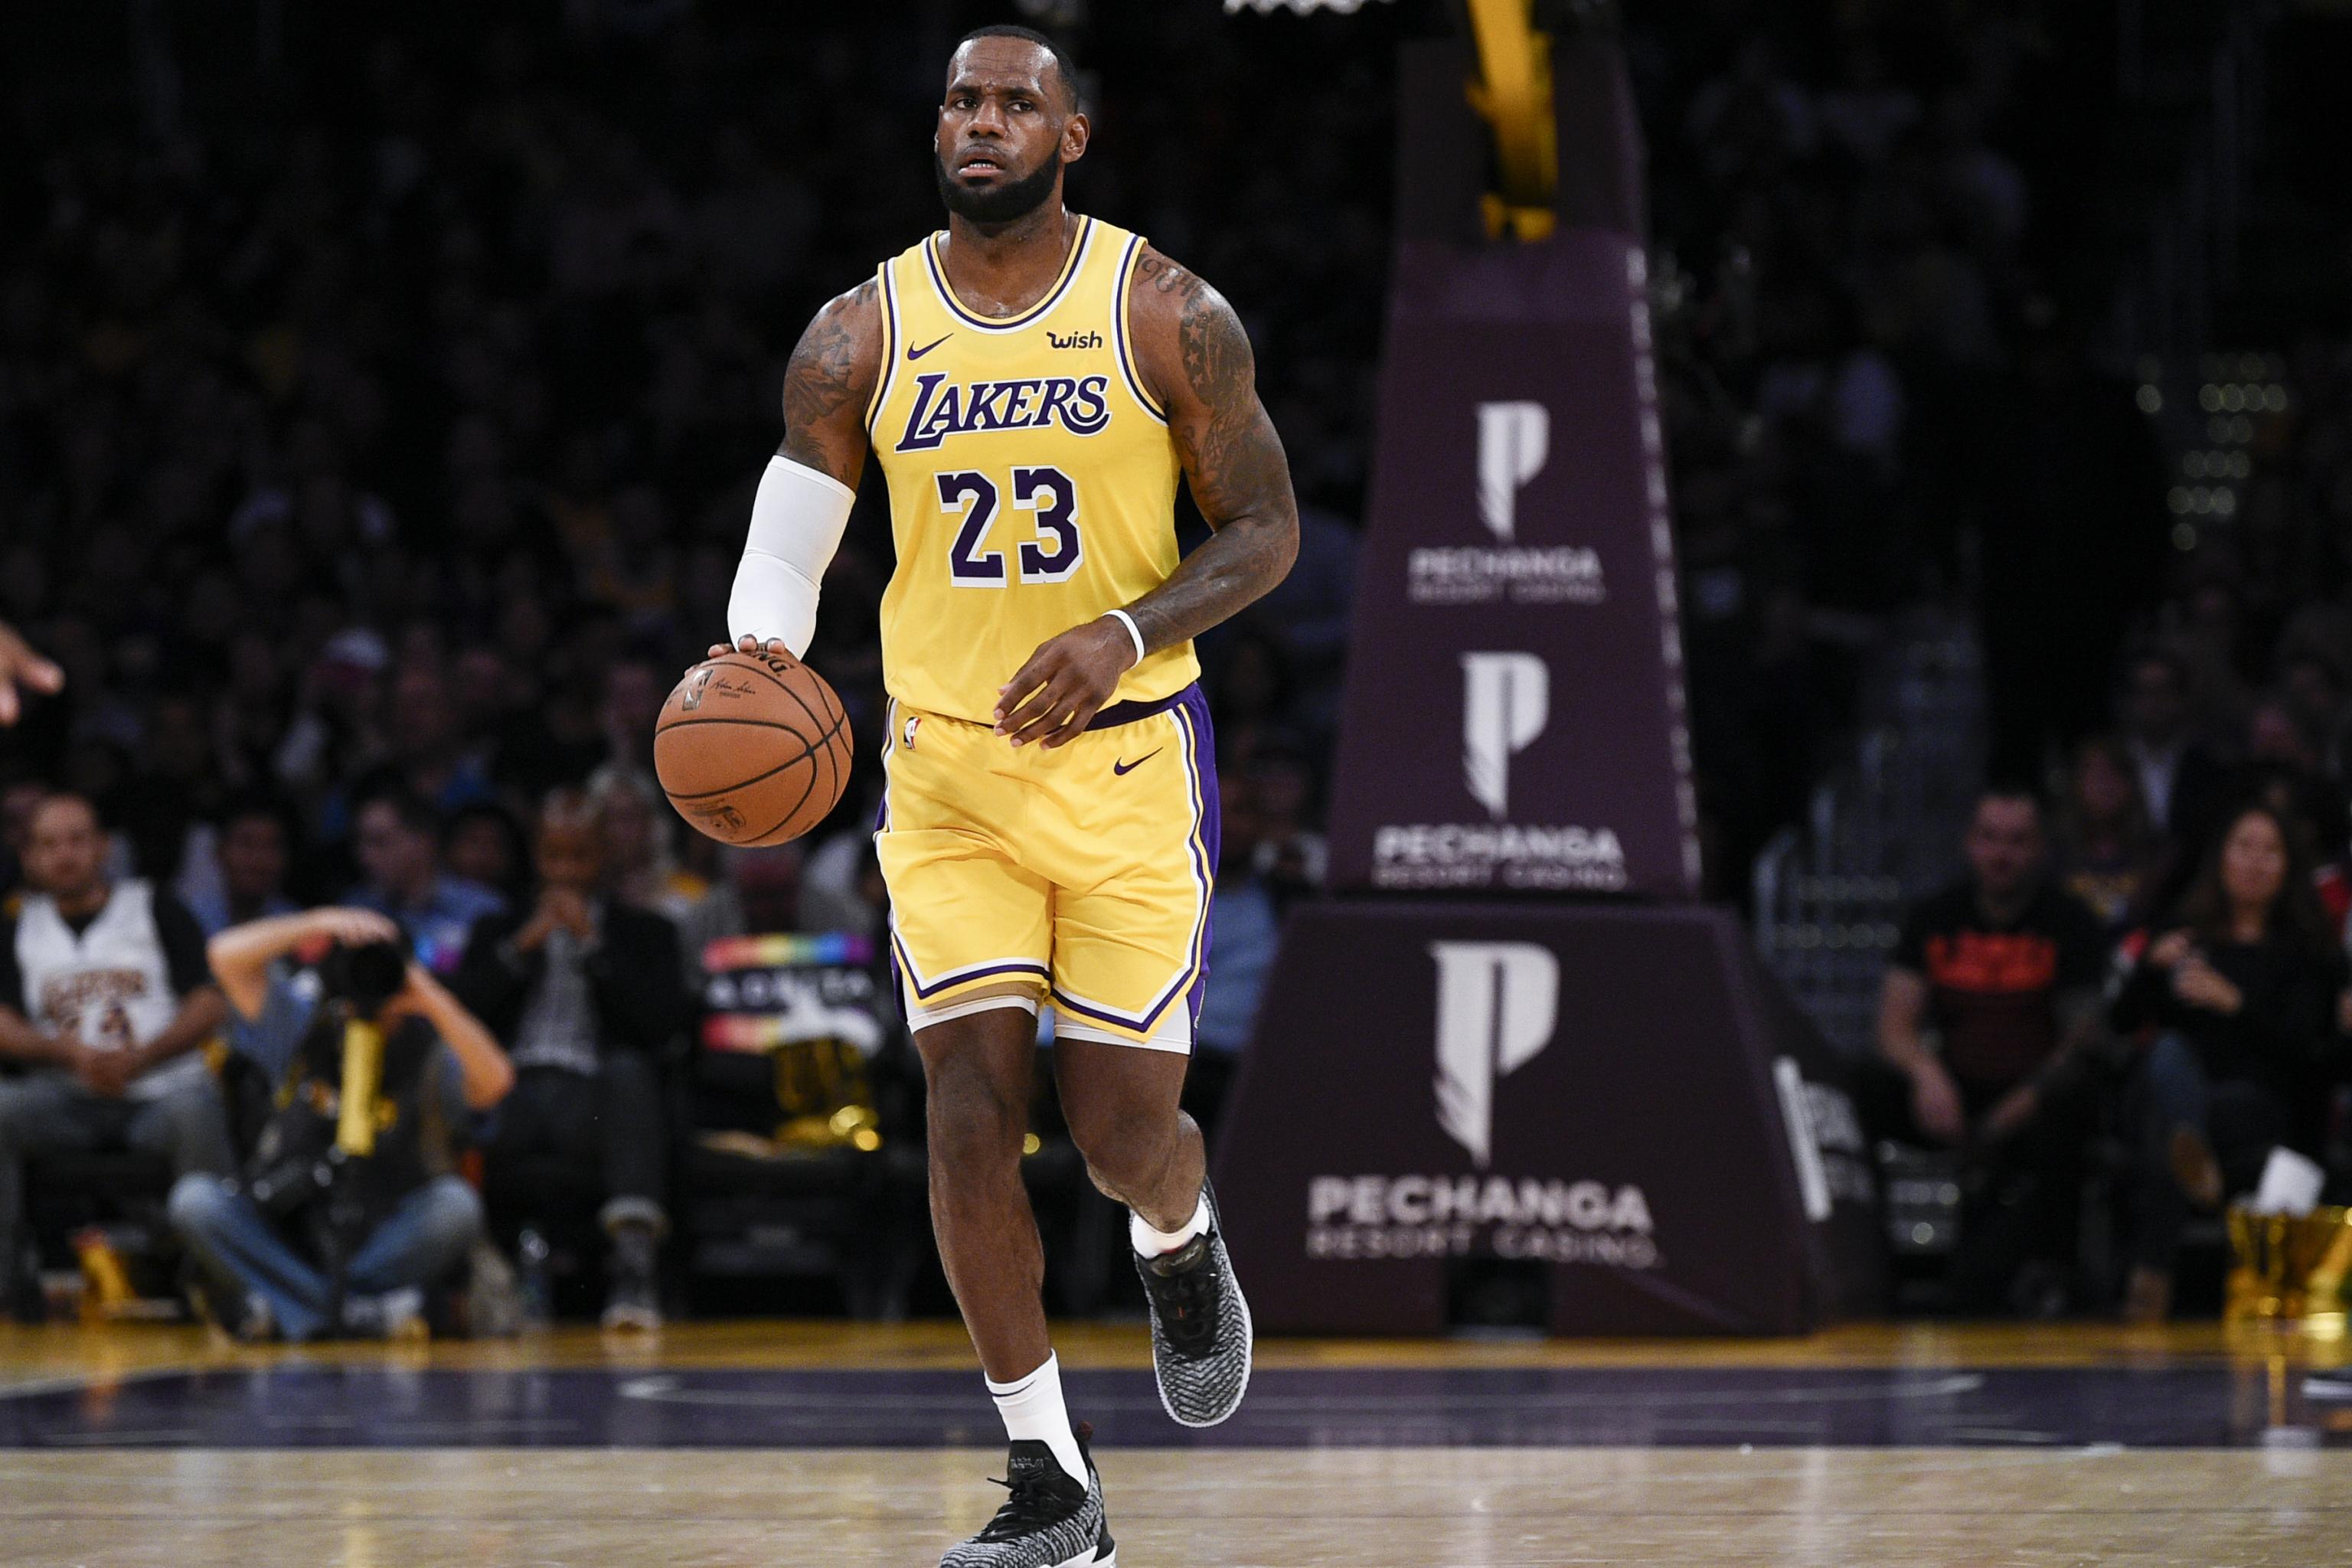 Lakers Lebron James Passes Andre Miller For 10th On Nba All Time Assist List Bleacher Report Latest News Videos And Highlights